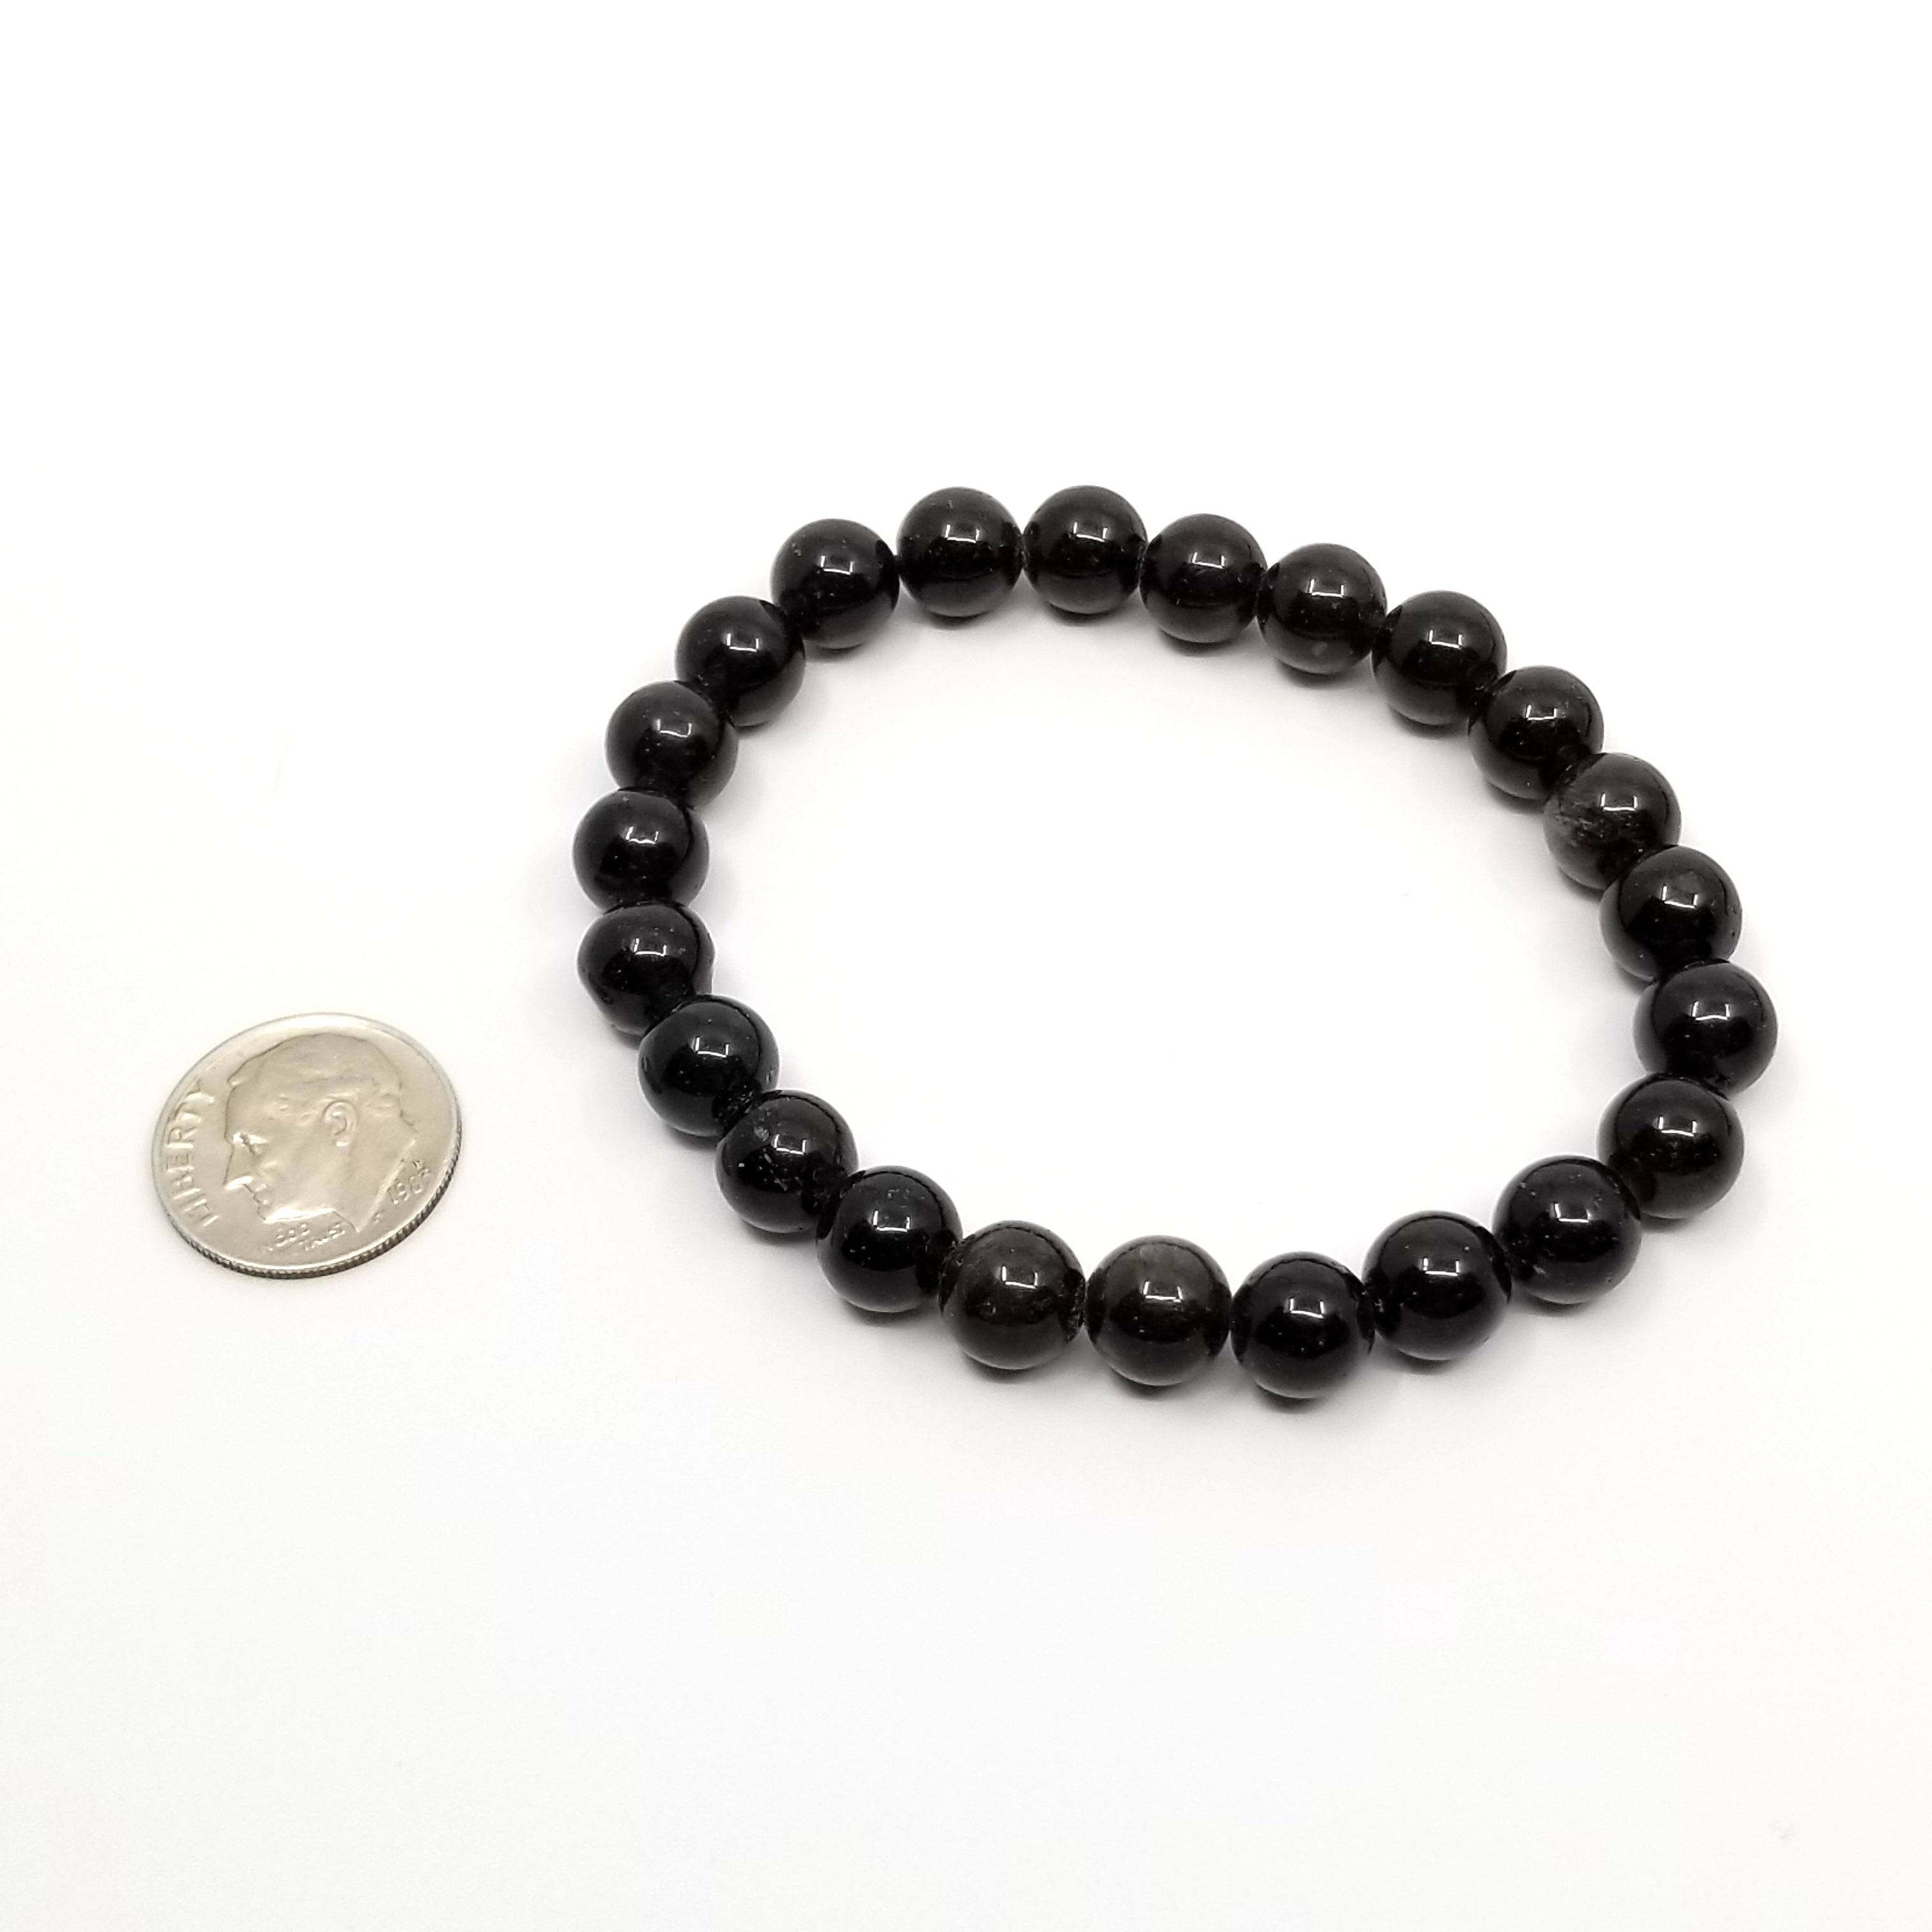 Consecrated Feng Shui Black Obsidian Bracelet For Men And Women Natural  Handchain 10-12-14mm Wealth Protection Lucky Pixiu Beads - Bracelets -  AliExpress